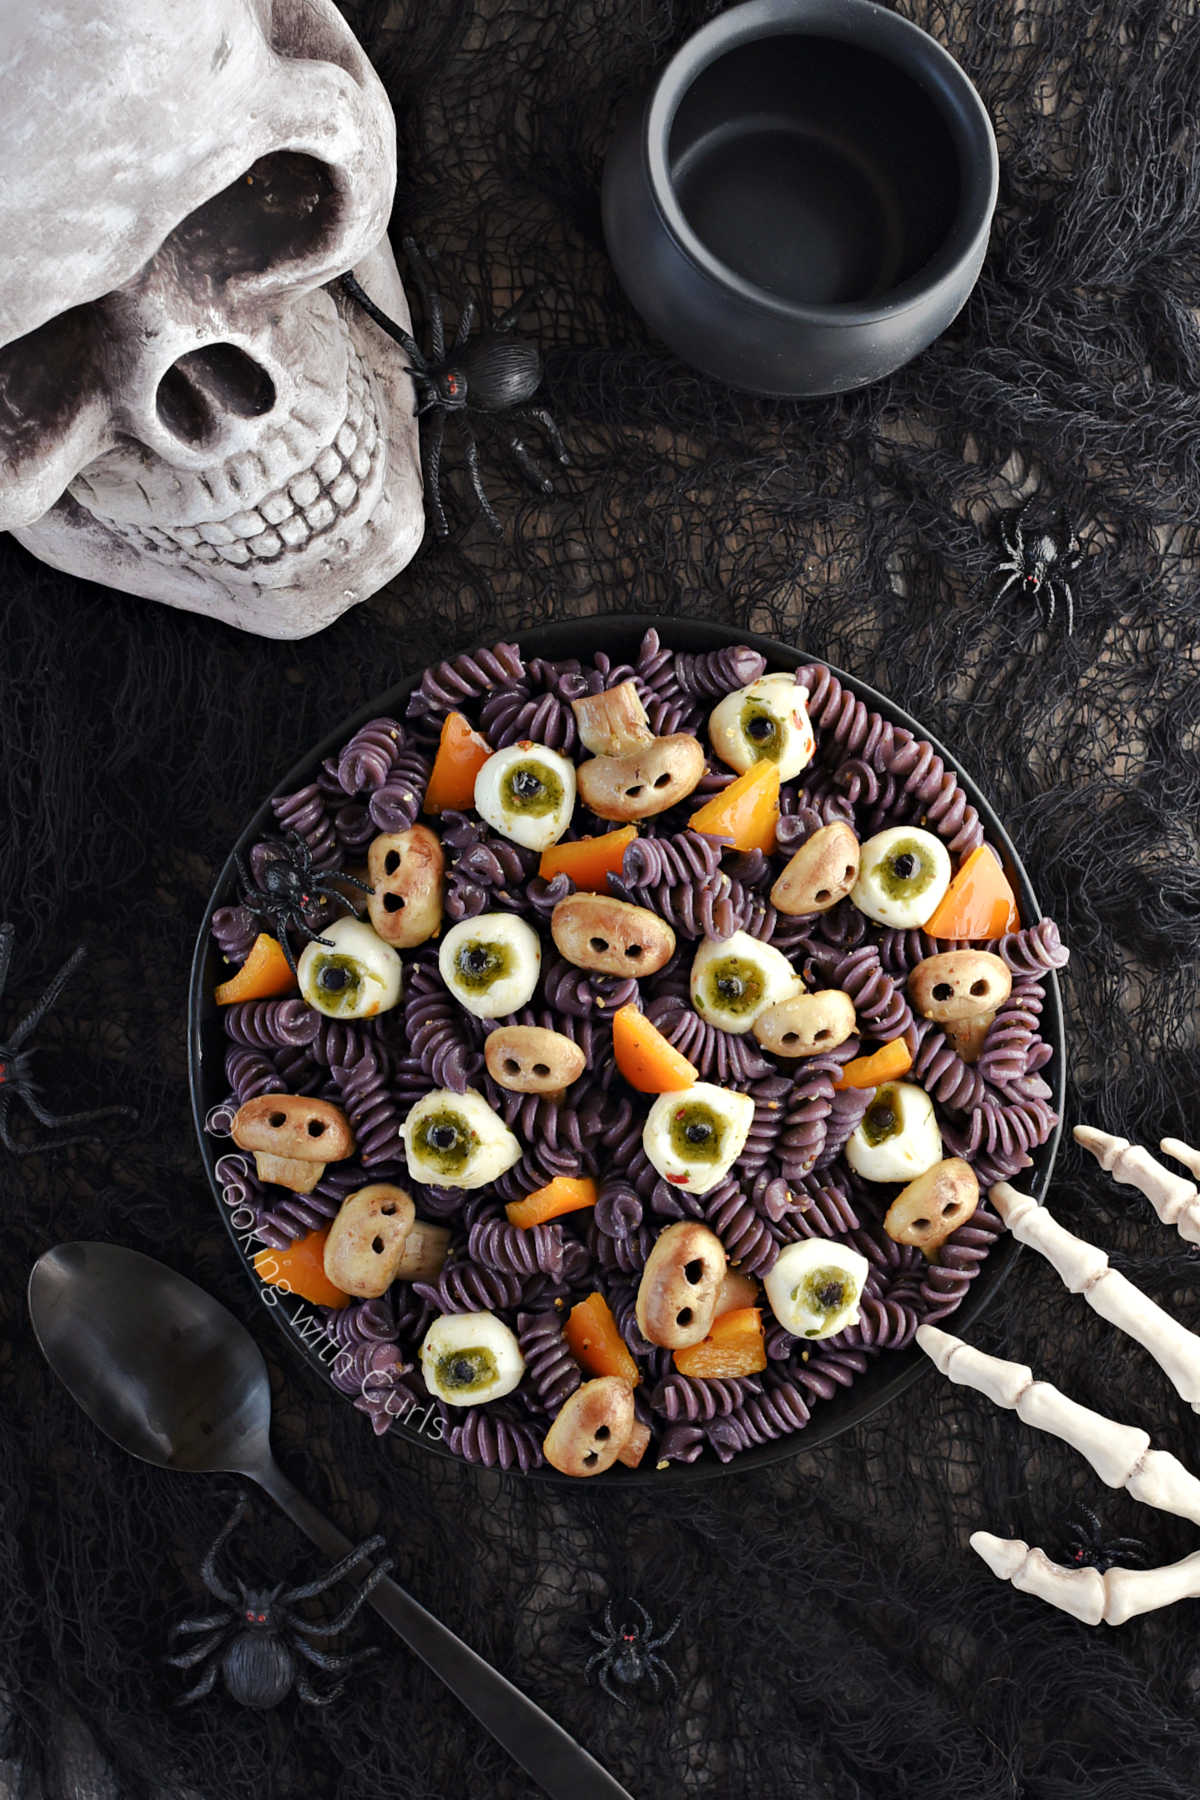 Black spiral pasta, mushroom skulls, mozzarella eyeballs, and orange triangles in a black serving bowl with skull in the background and skeleton hand on the edge of the bowl.